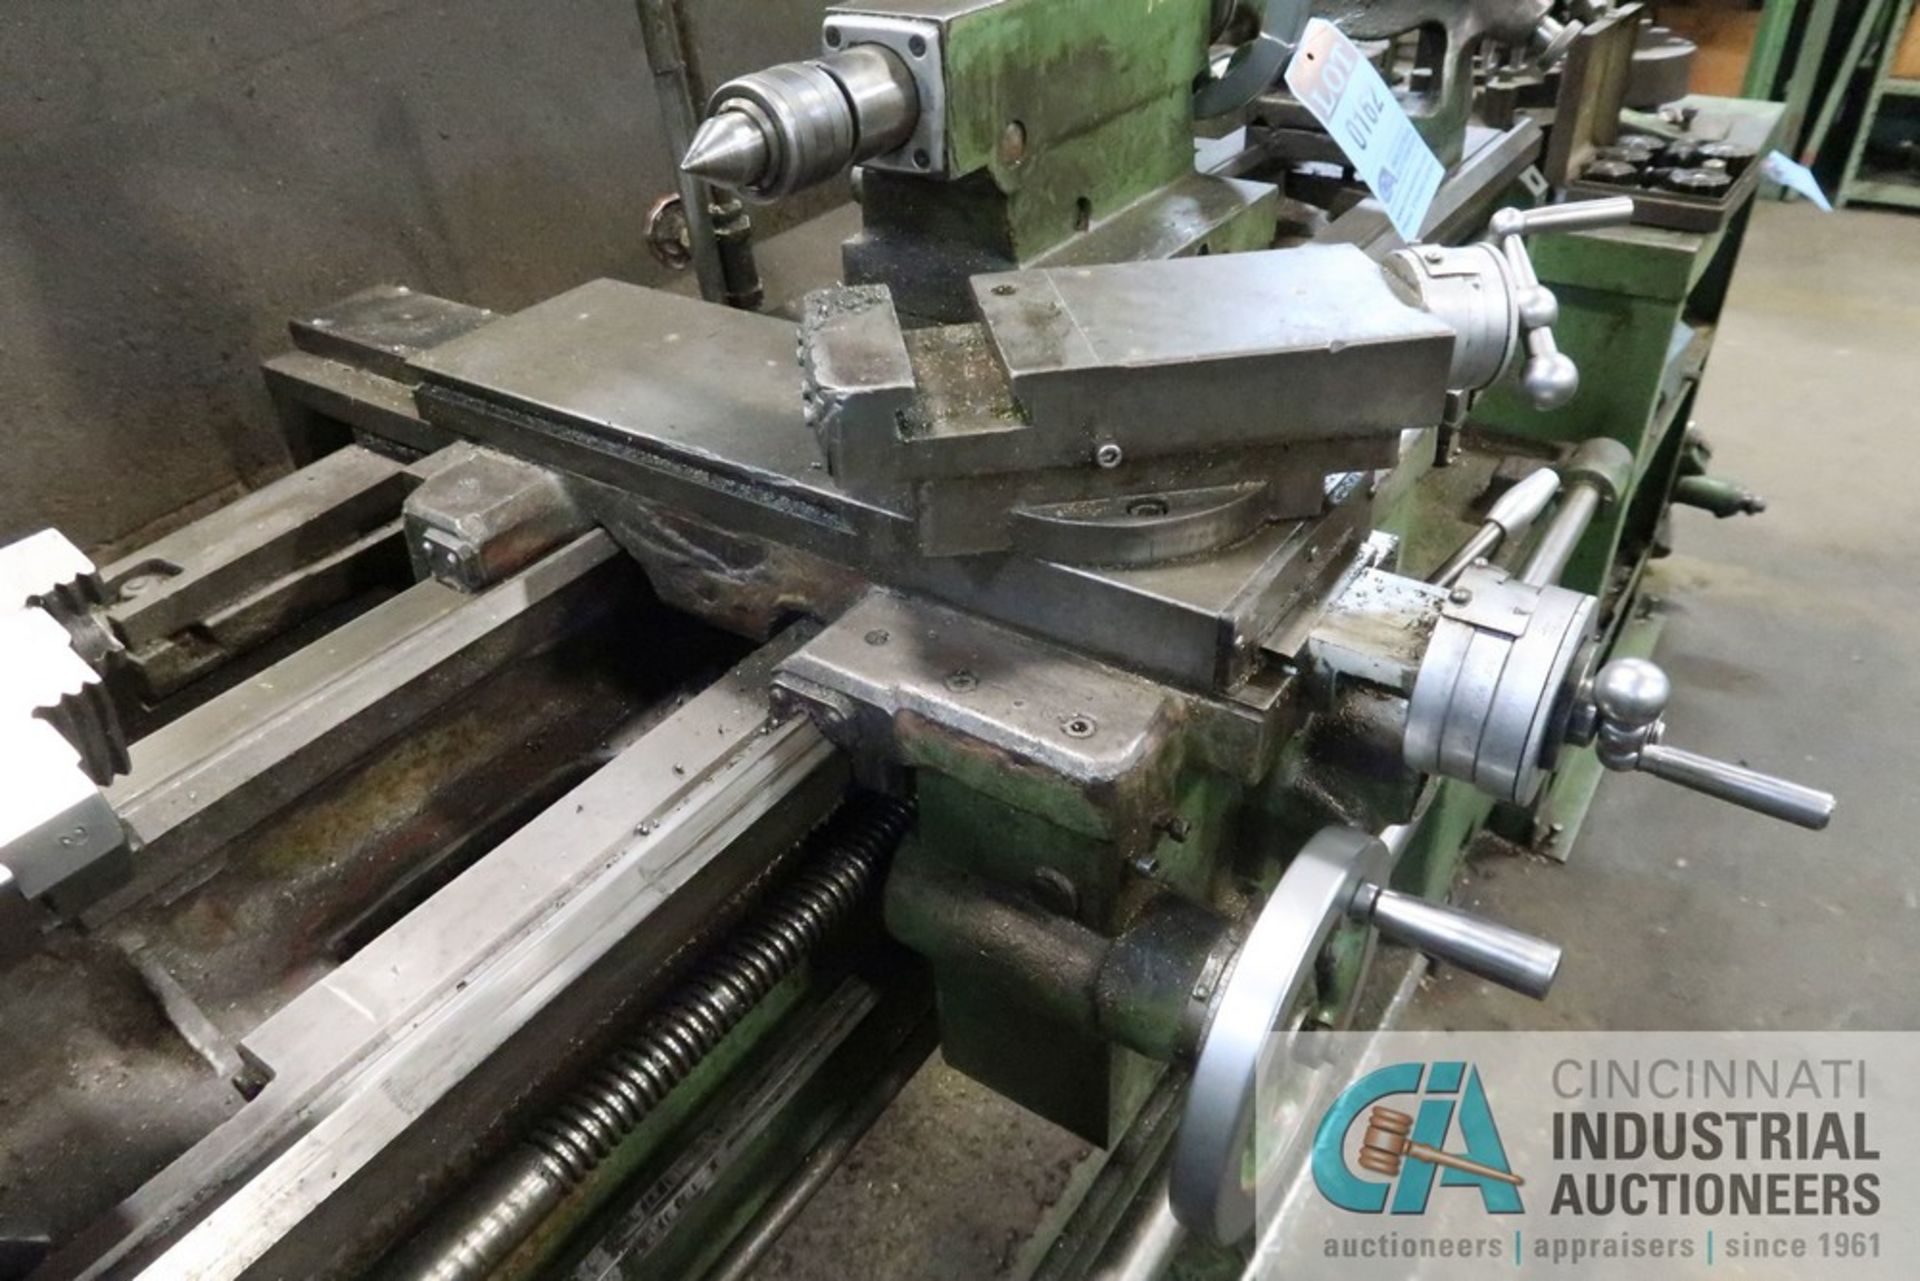 16" X 40" VICTOR MODEL 1640B PRECISION HIGH SPEED LATHE, 10" 3-JAW CHUCK, STEADY REST, TAILSTOCK, - Image 8 of 12